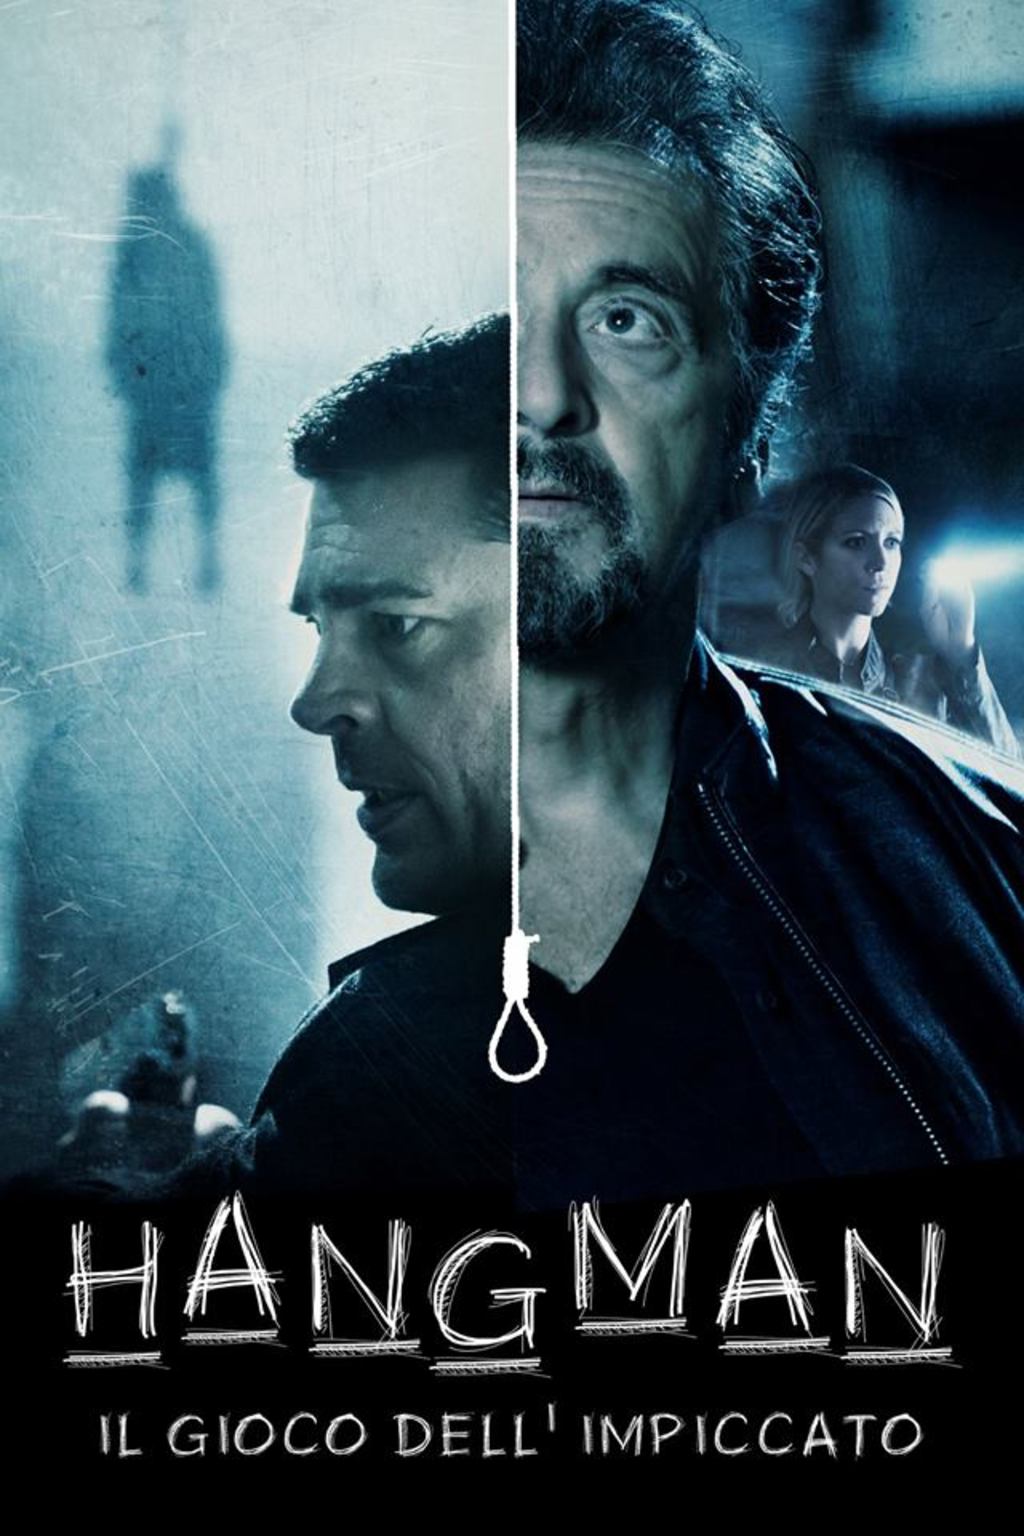 Watch The Hangman Full movie Online In HD  Find where to watch it online  on Justdial